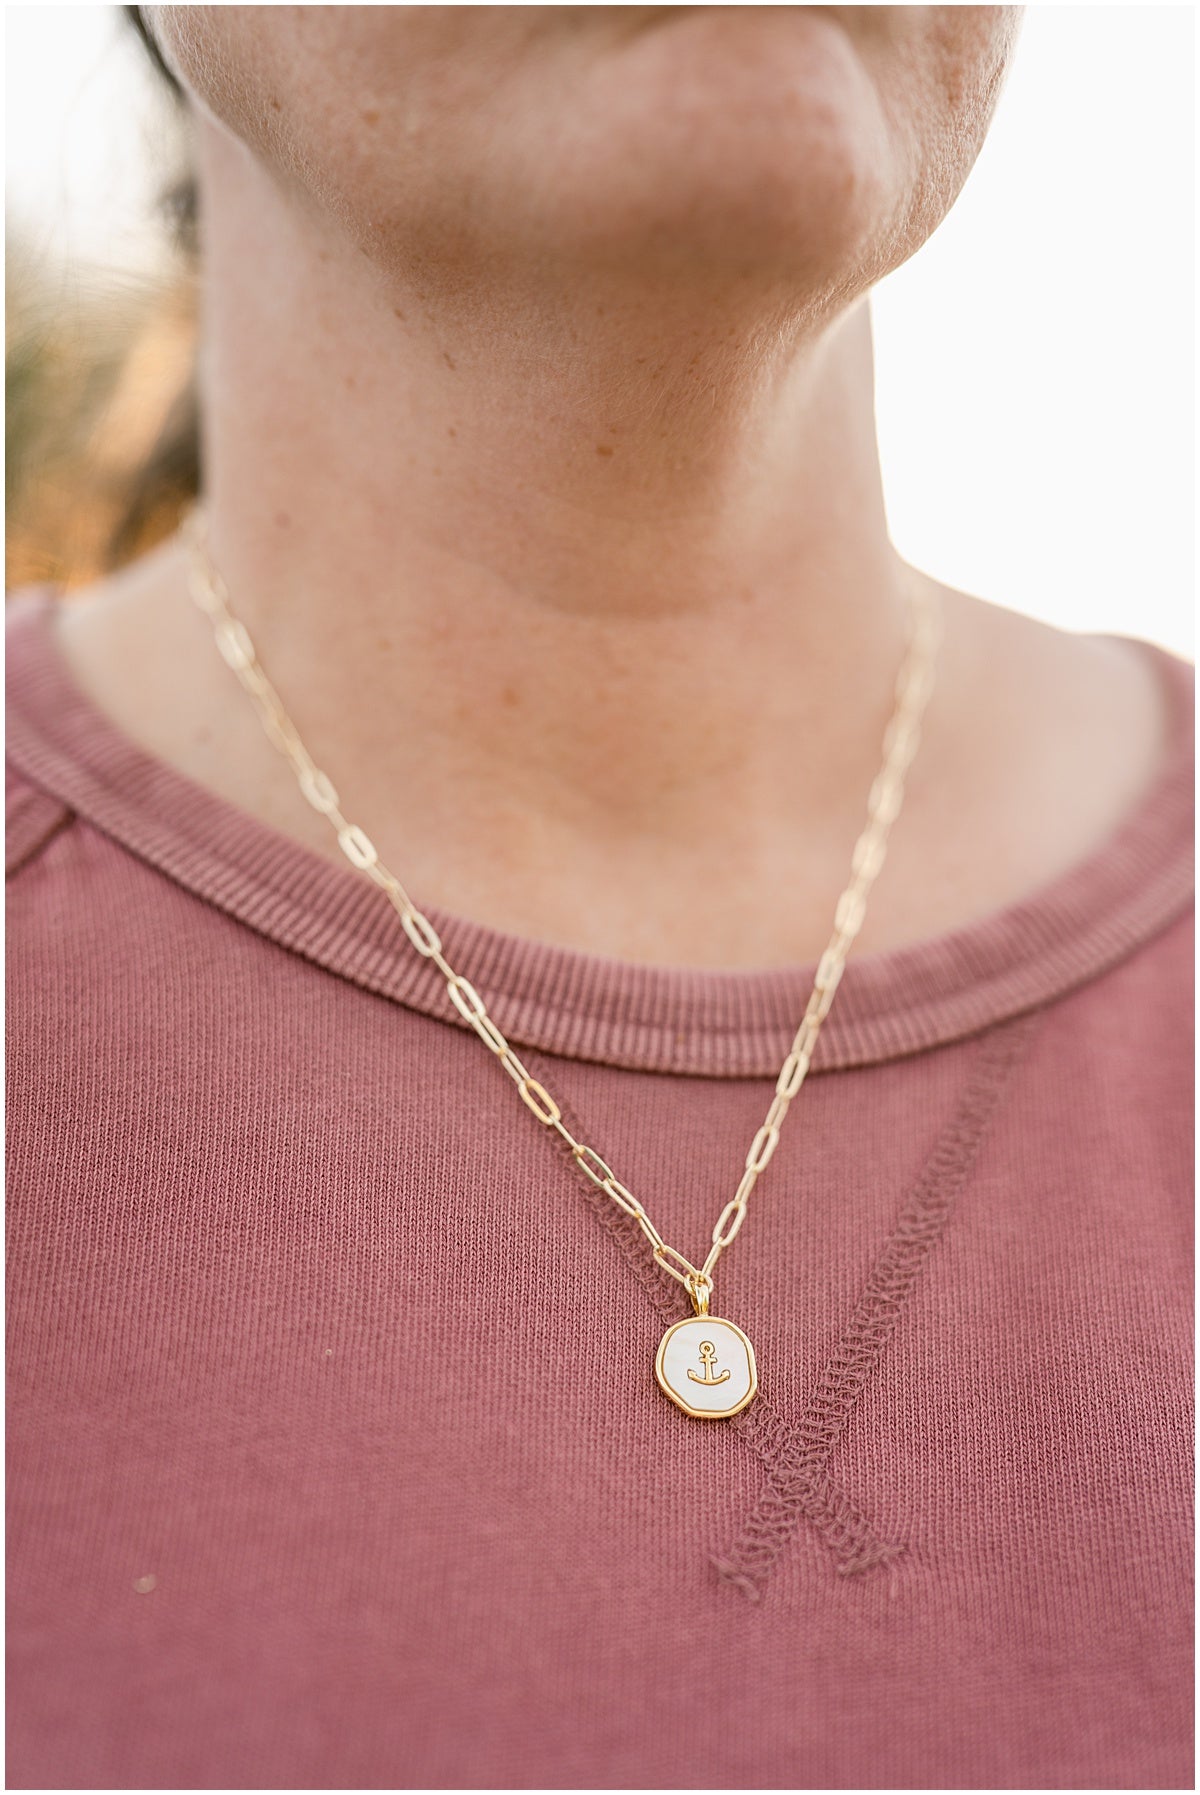 Pretty Mimi Necklace in Goldplated-Silver Sterling 925 from Maanesten